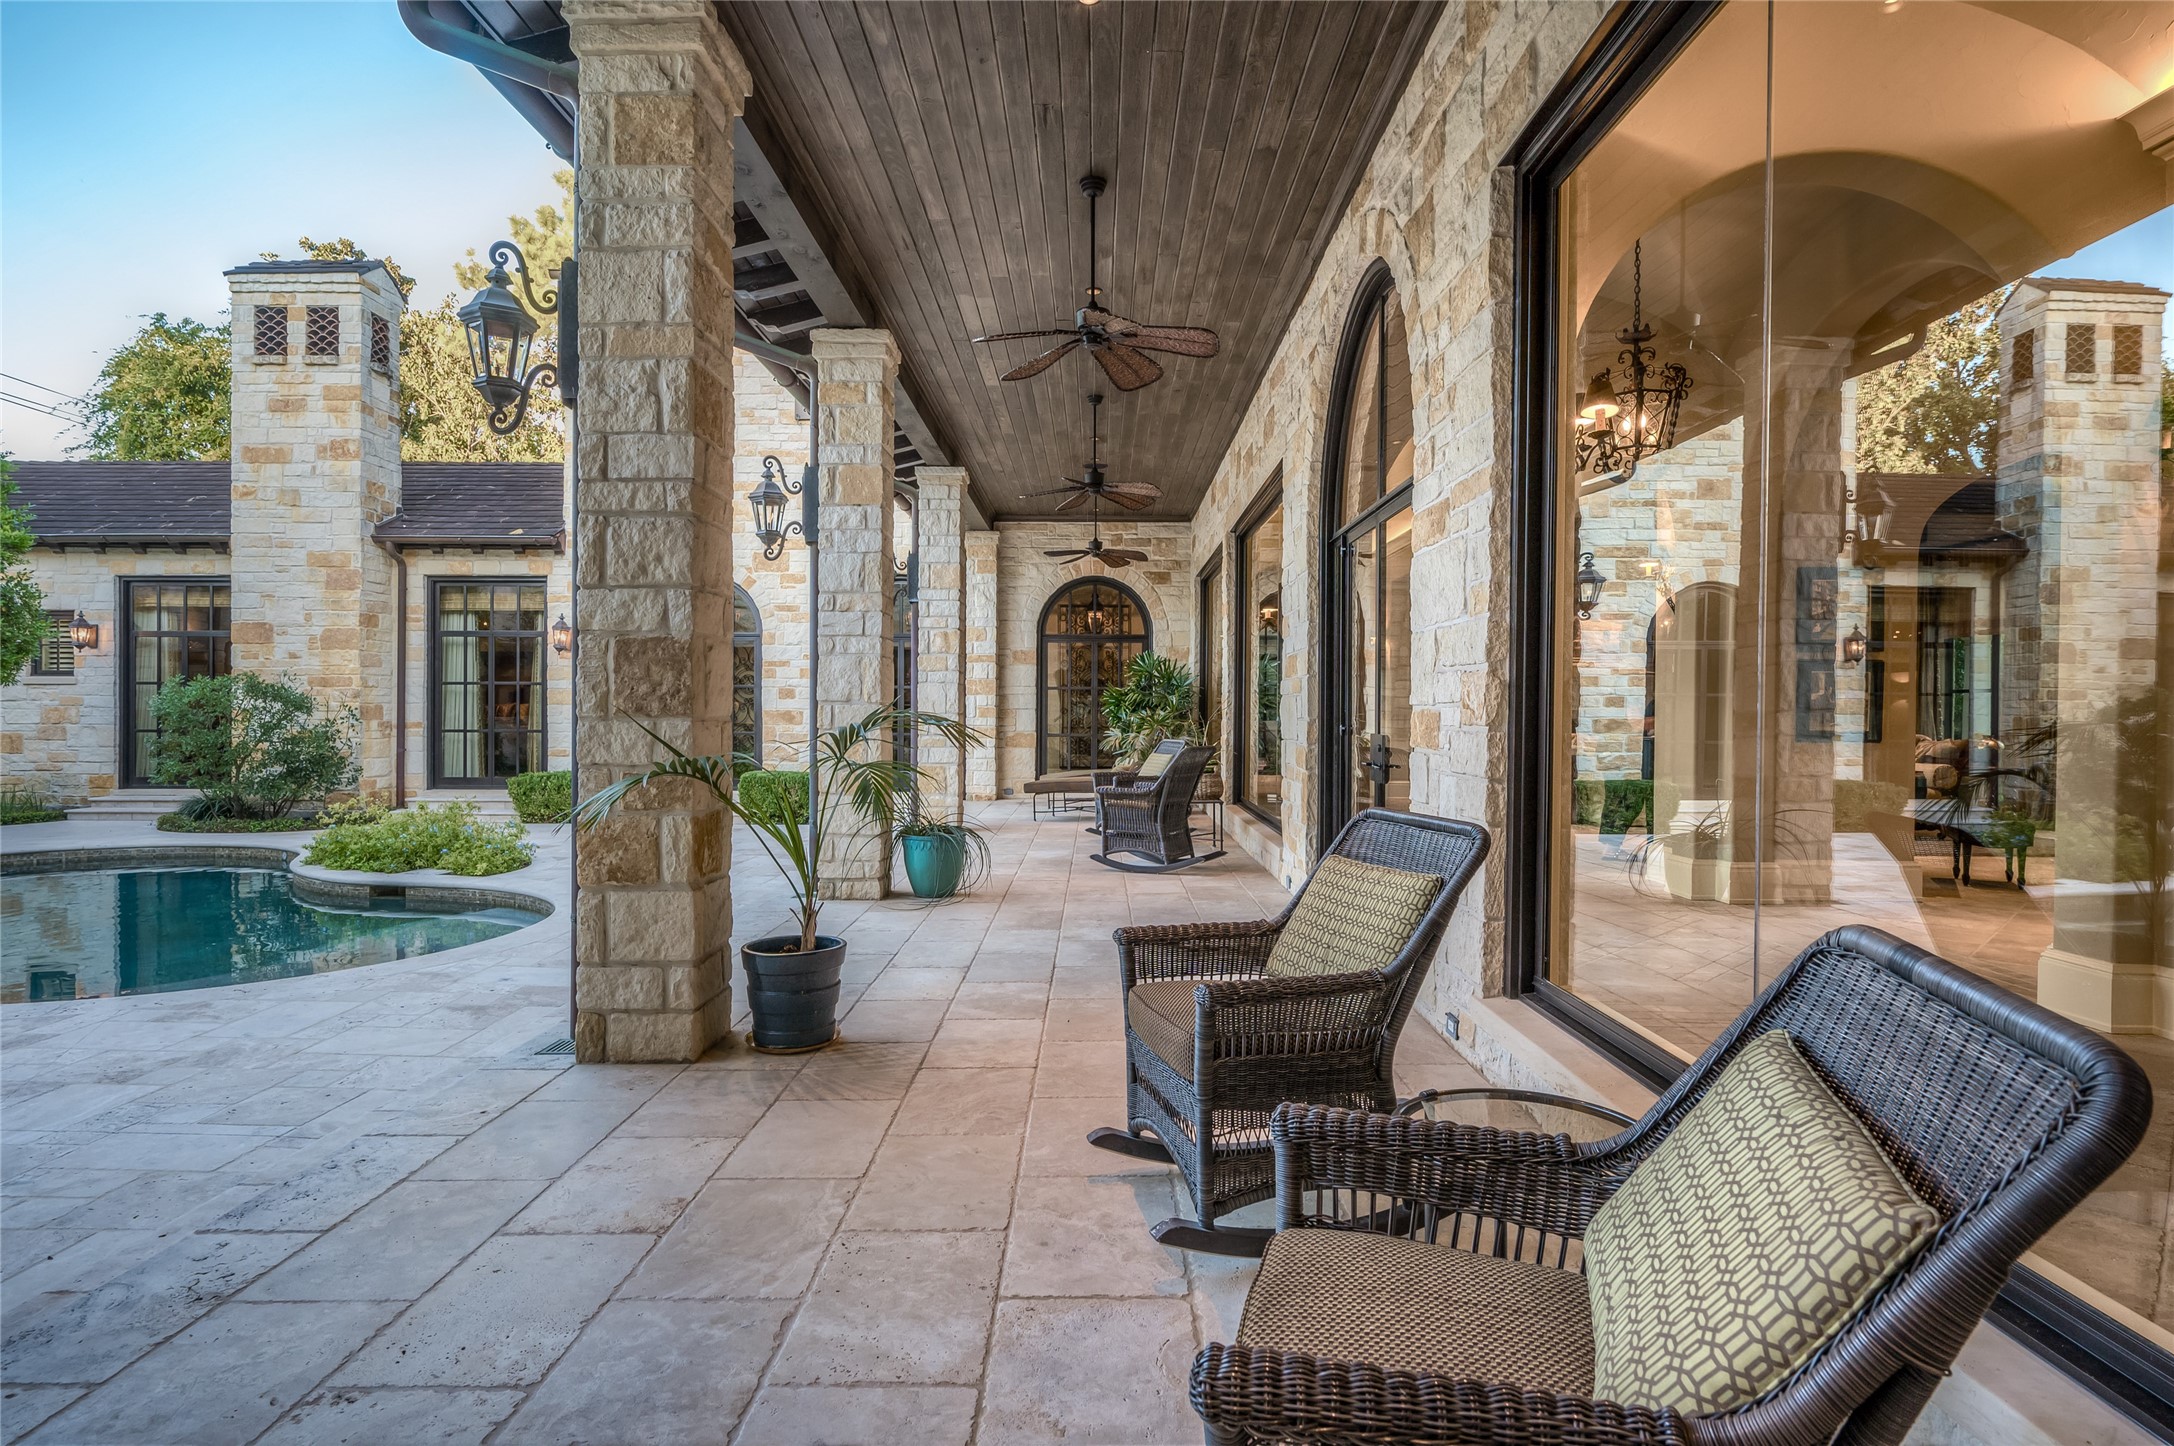 [Outdoor Living / Dining Area]
This view reveals the inviting outdoor living and dining room with raised stone fireplace. Paneled door at rear opens to the full pool bath and changing room. Note butted glass window in rotunda bar.